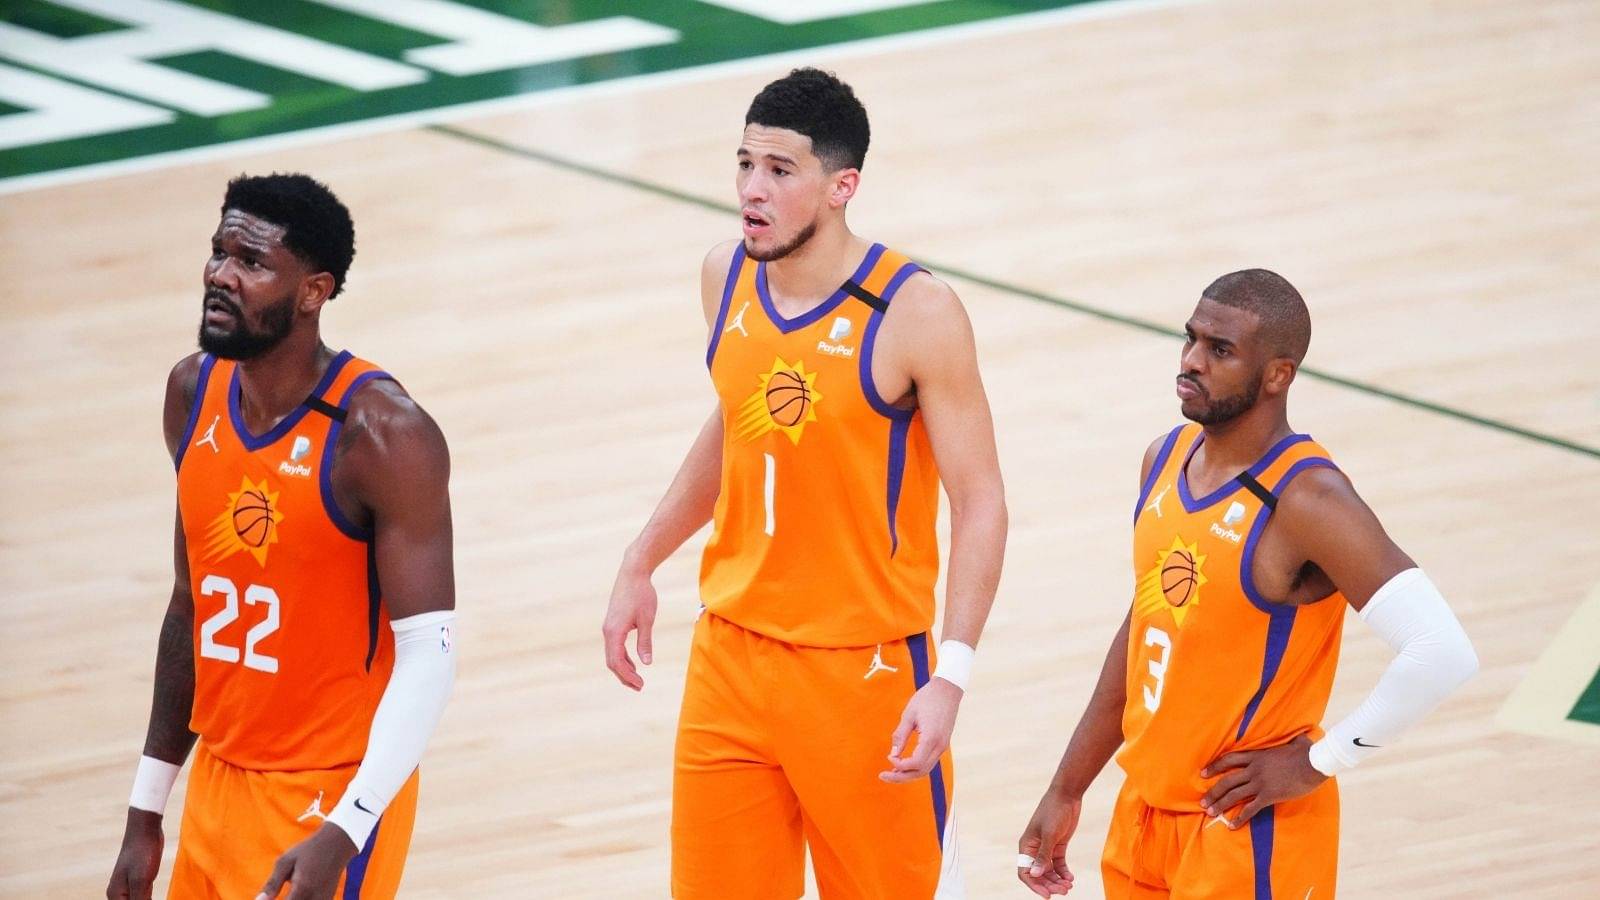 "Kareem handed over reins to Magic, it's time for Devin Booker and Deandre Ayton to take over": Charles Barkley says the Suns stars must take more responsibilities off 37-yr-old Chris Paul